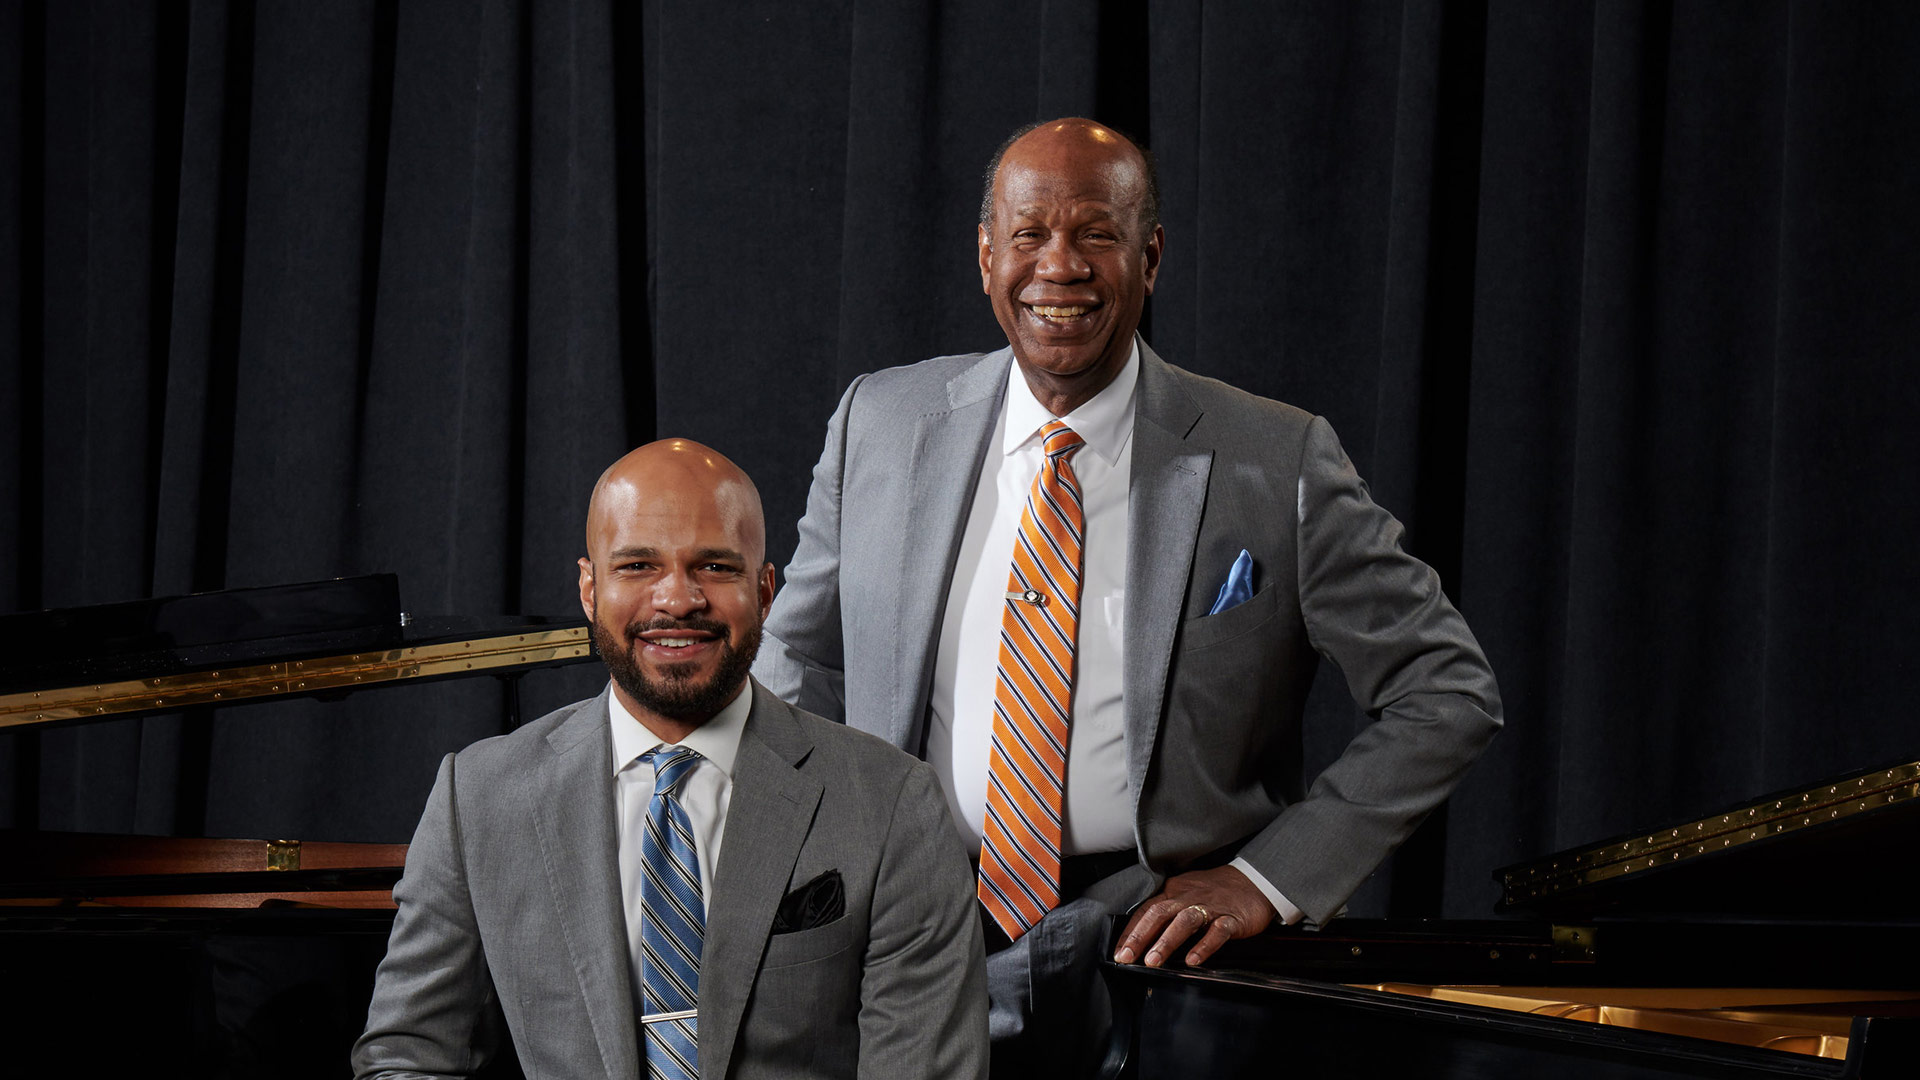 Father-son piano duo ushers in holiday season at Bayou Theater